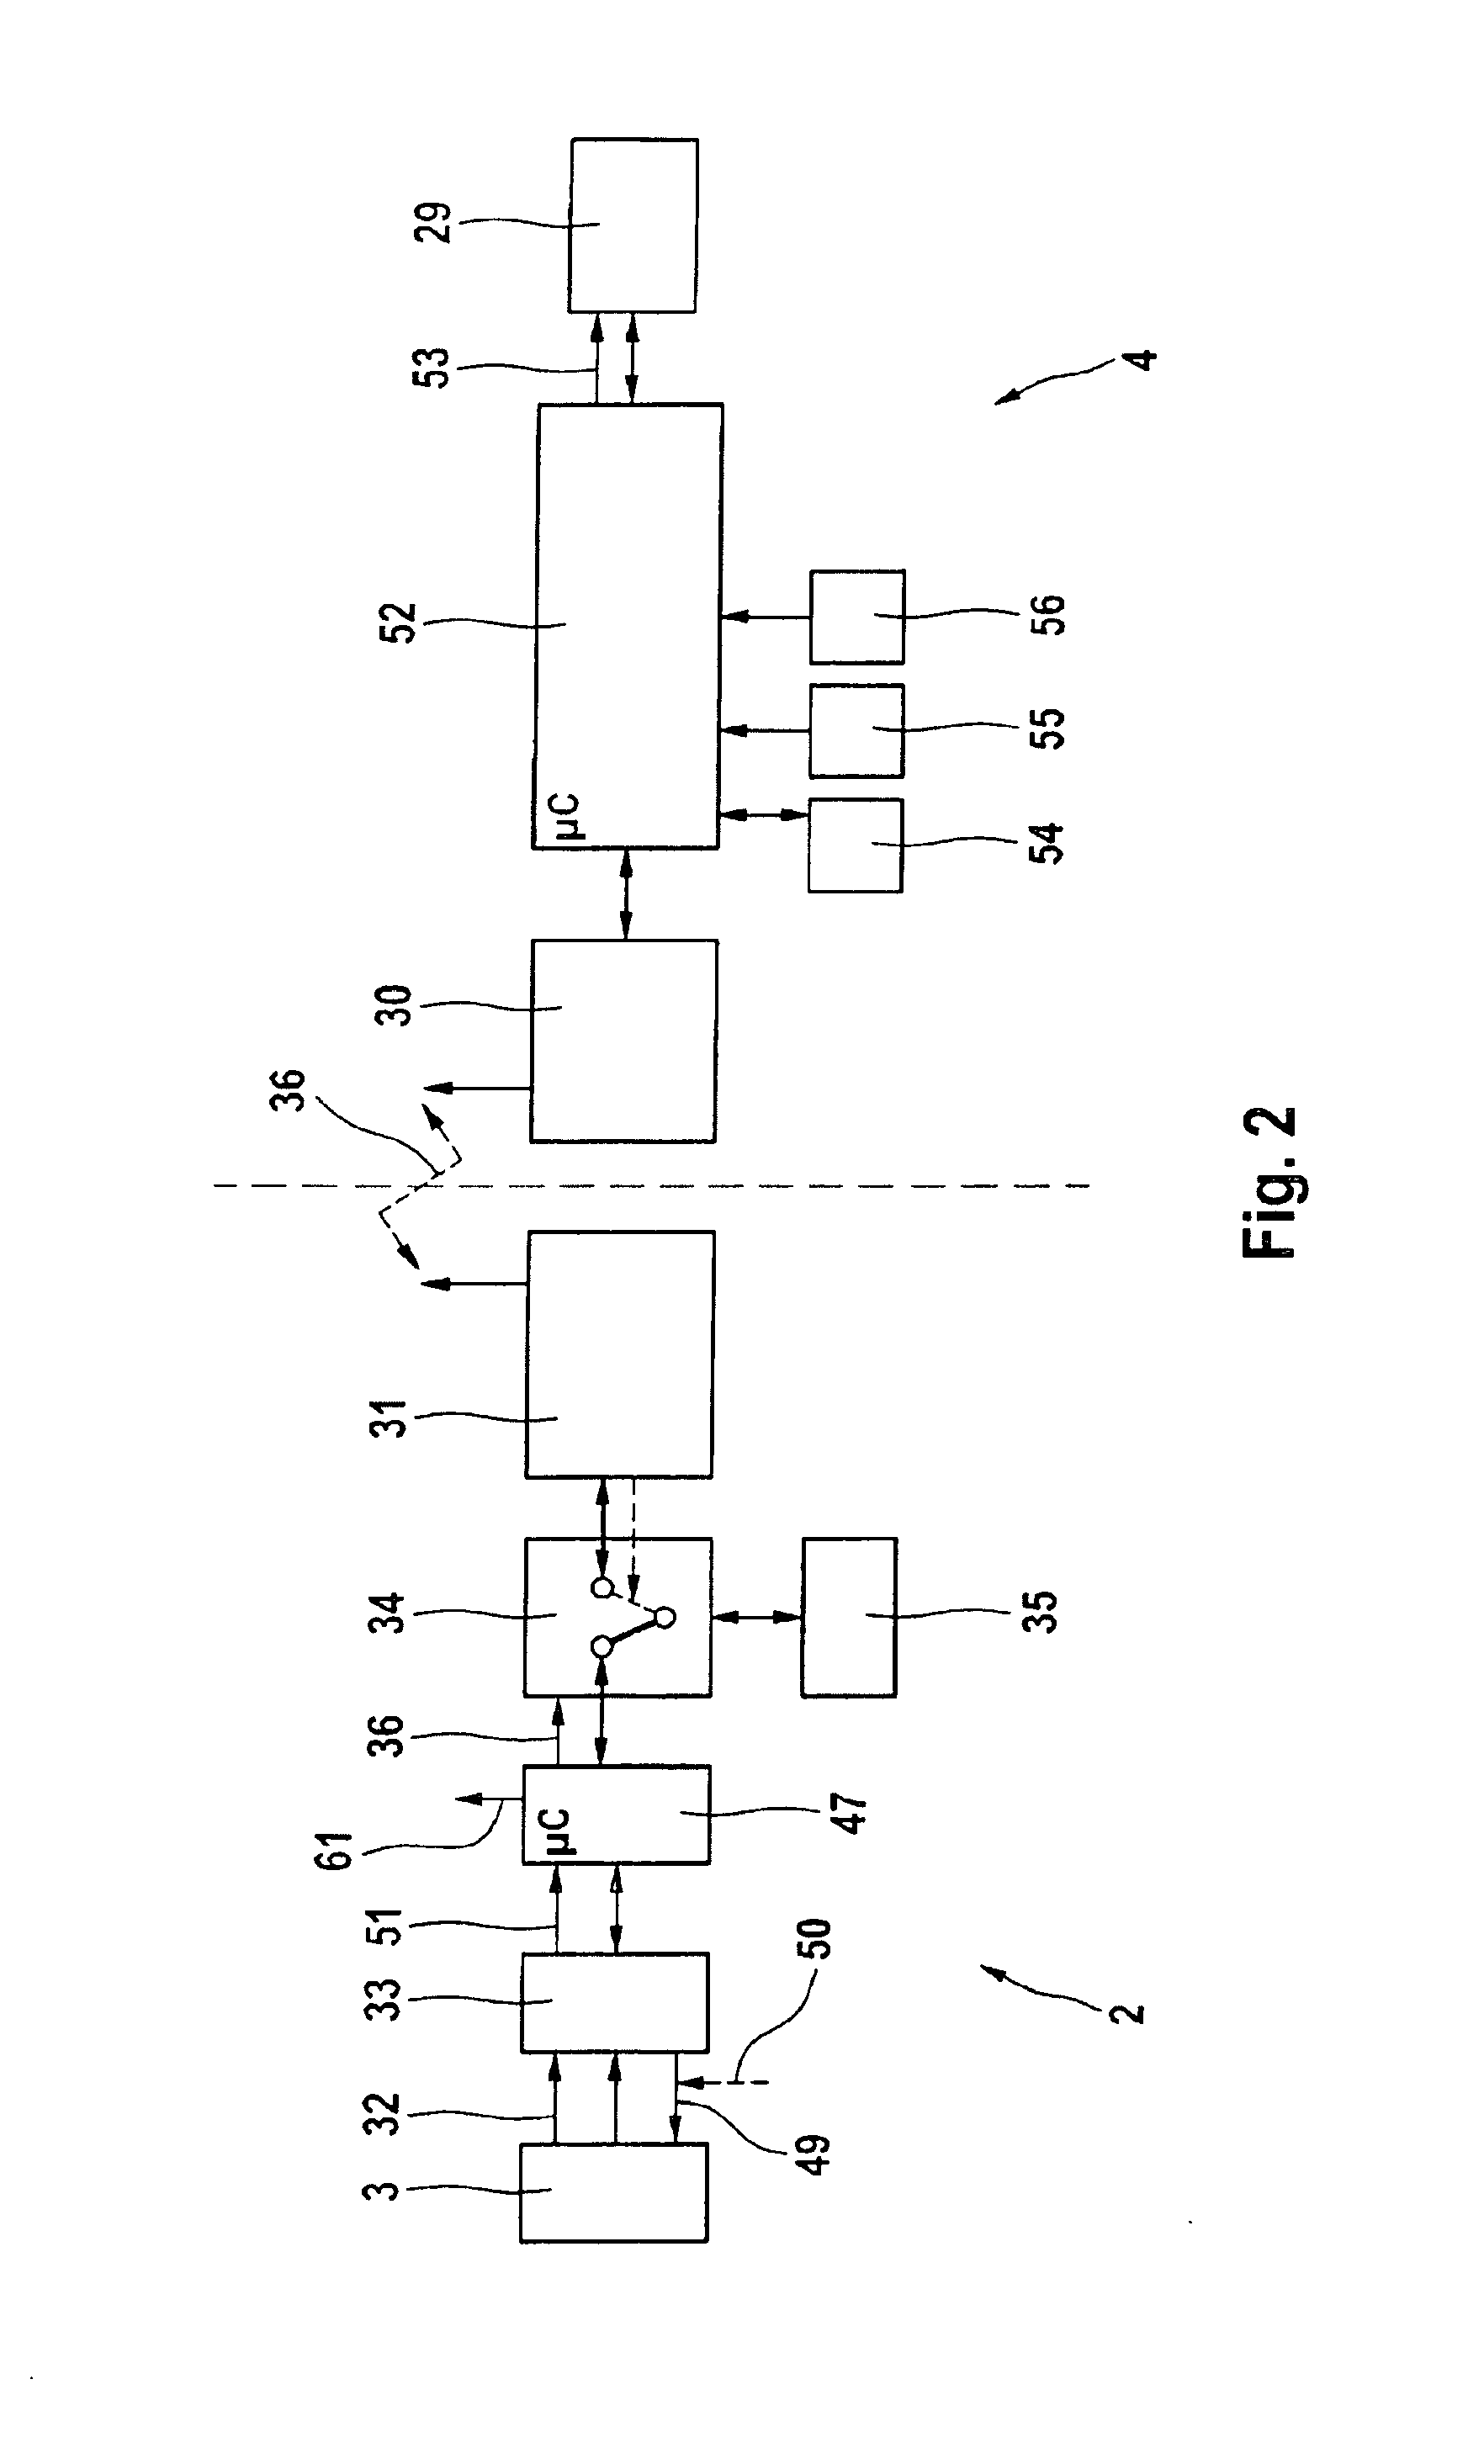 System for in-vivo measurement of an analyte concentration